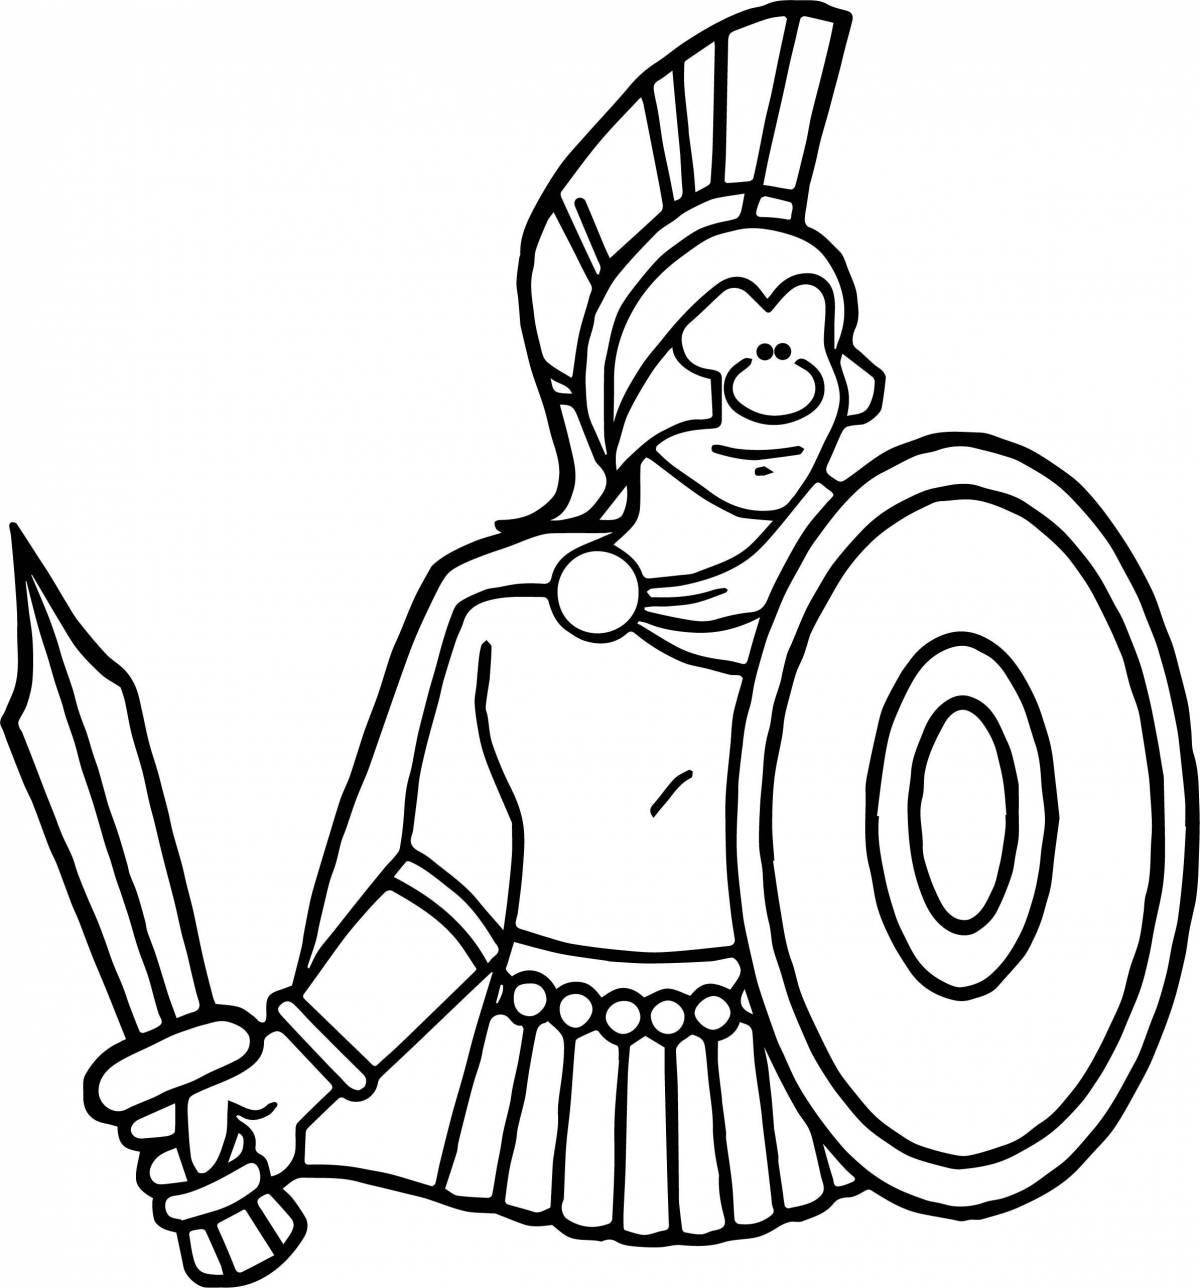 Dazzling gladiator coloring page